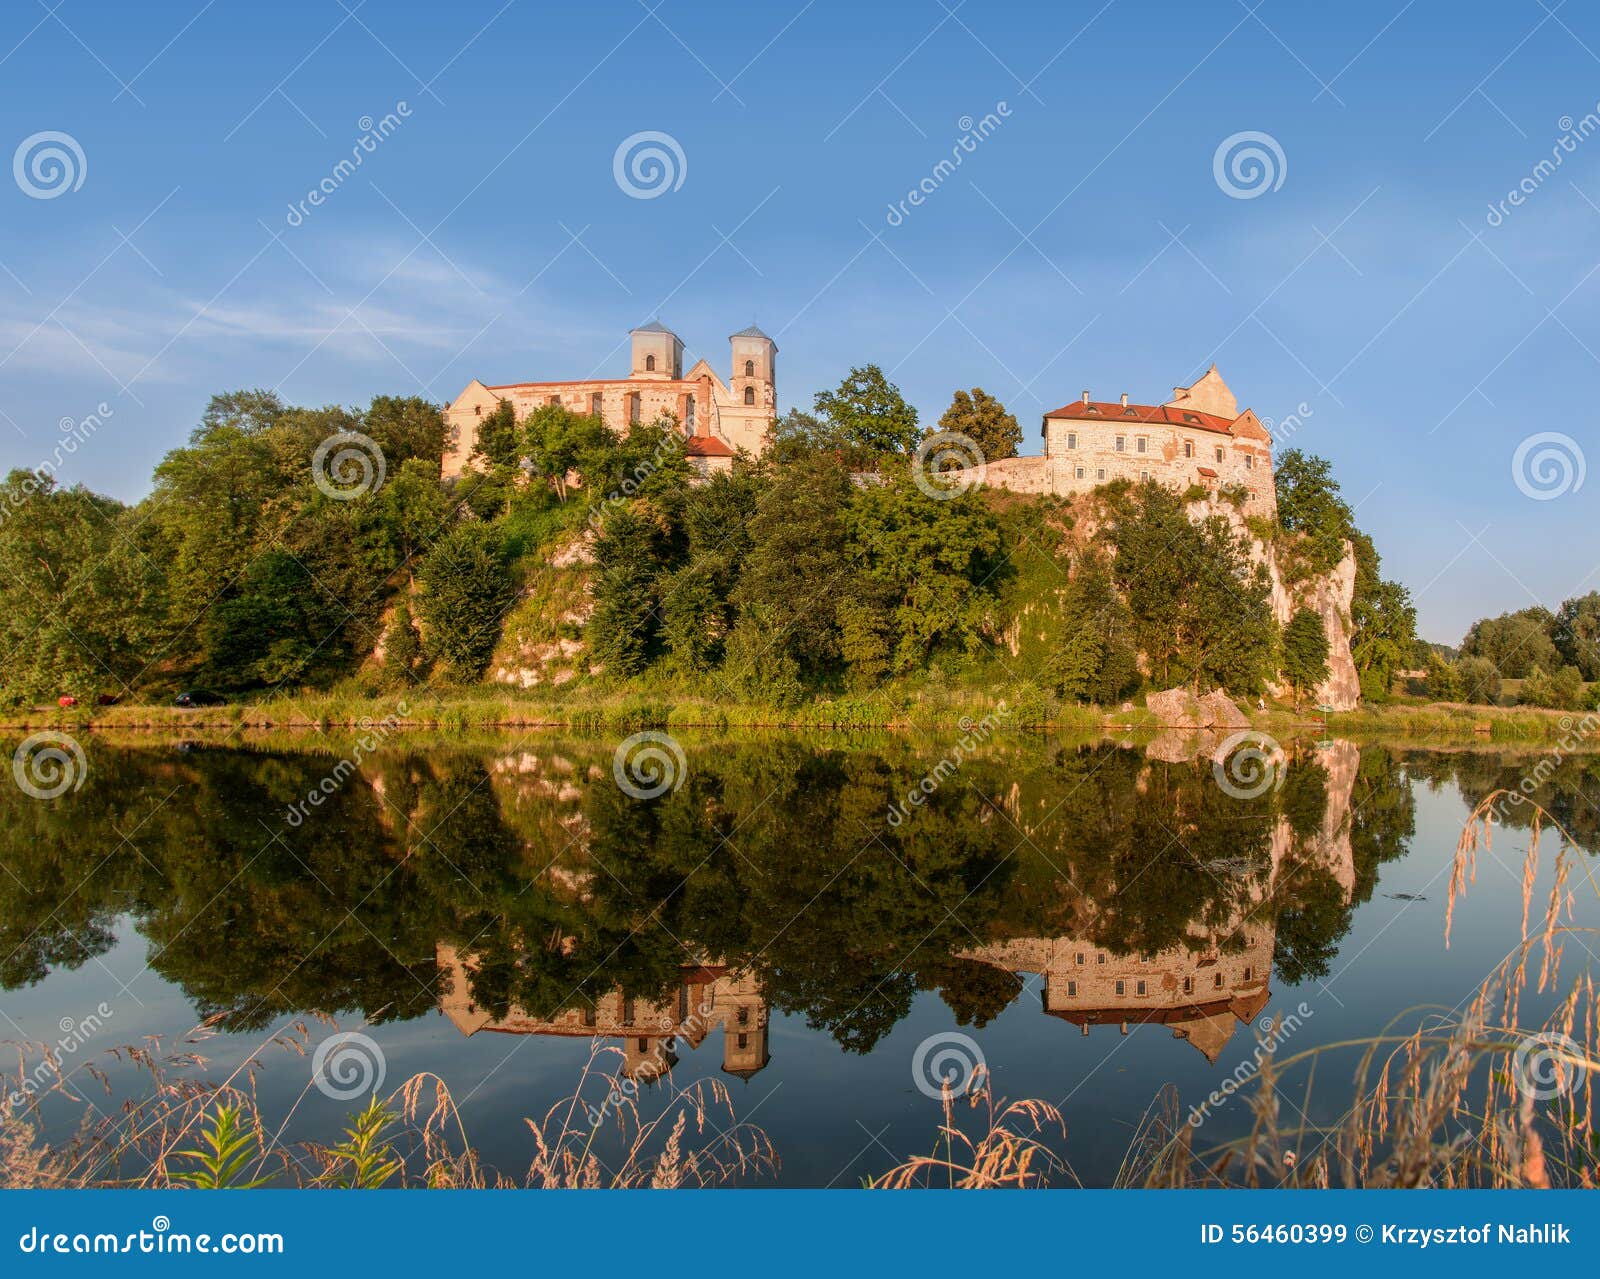 Benedictine abbey in Tyniec, Krakow, Poland. Benedictine monastery on the rocky hill in Tyniec near Cracow, Poland and its reflection in Vistula River at sunset.